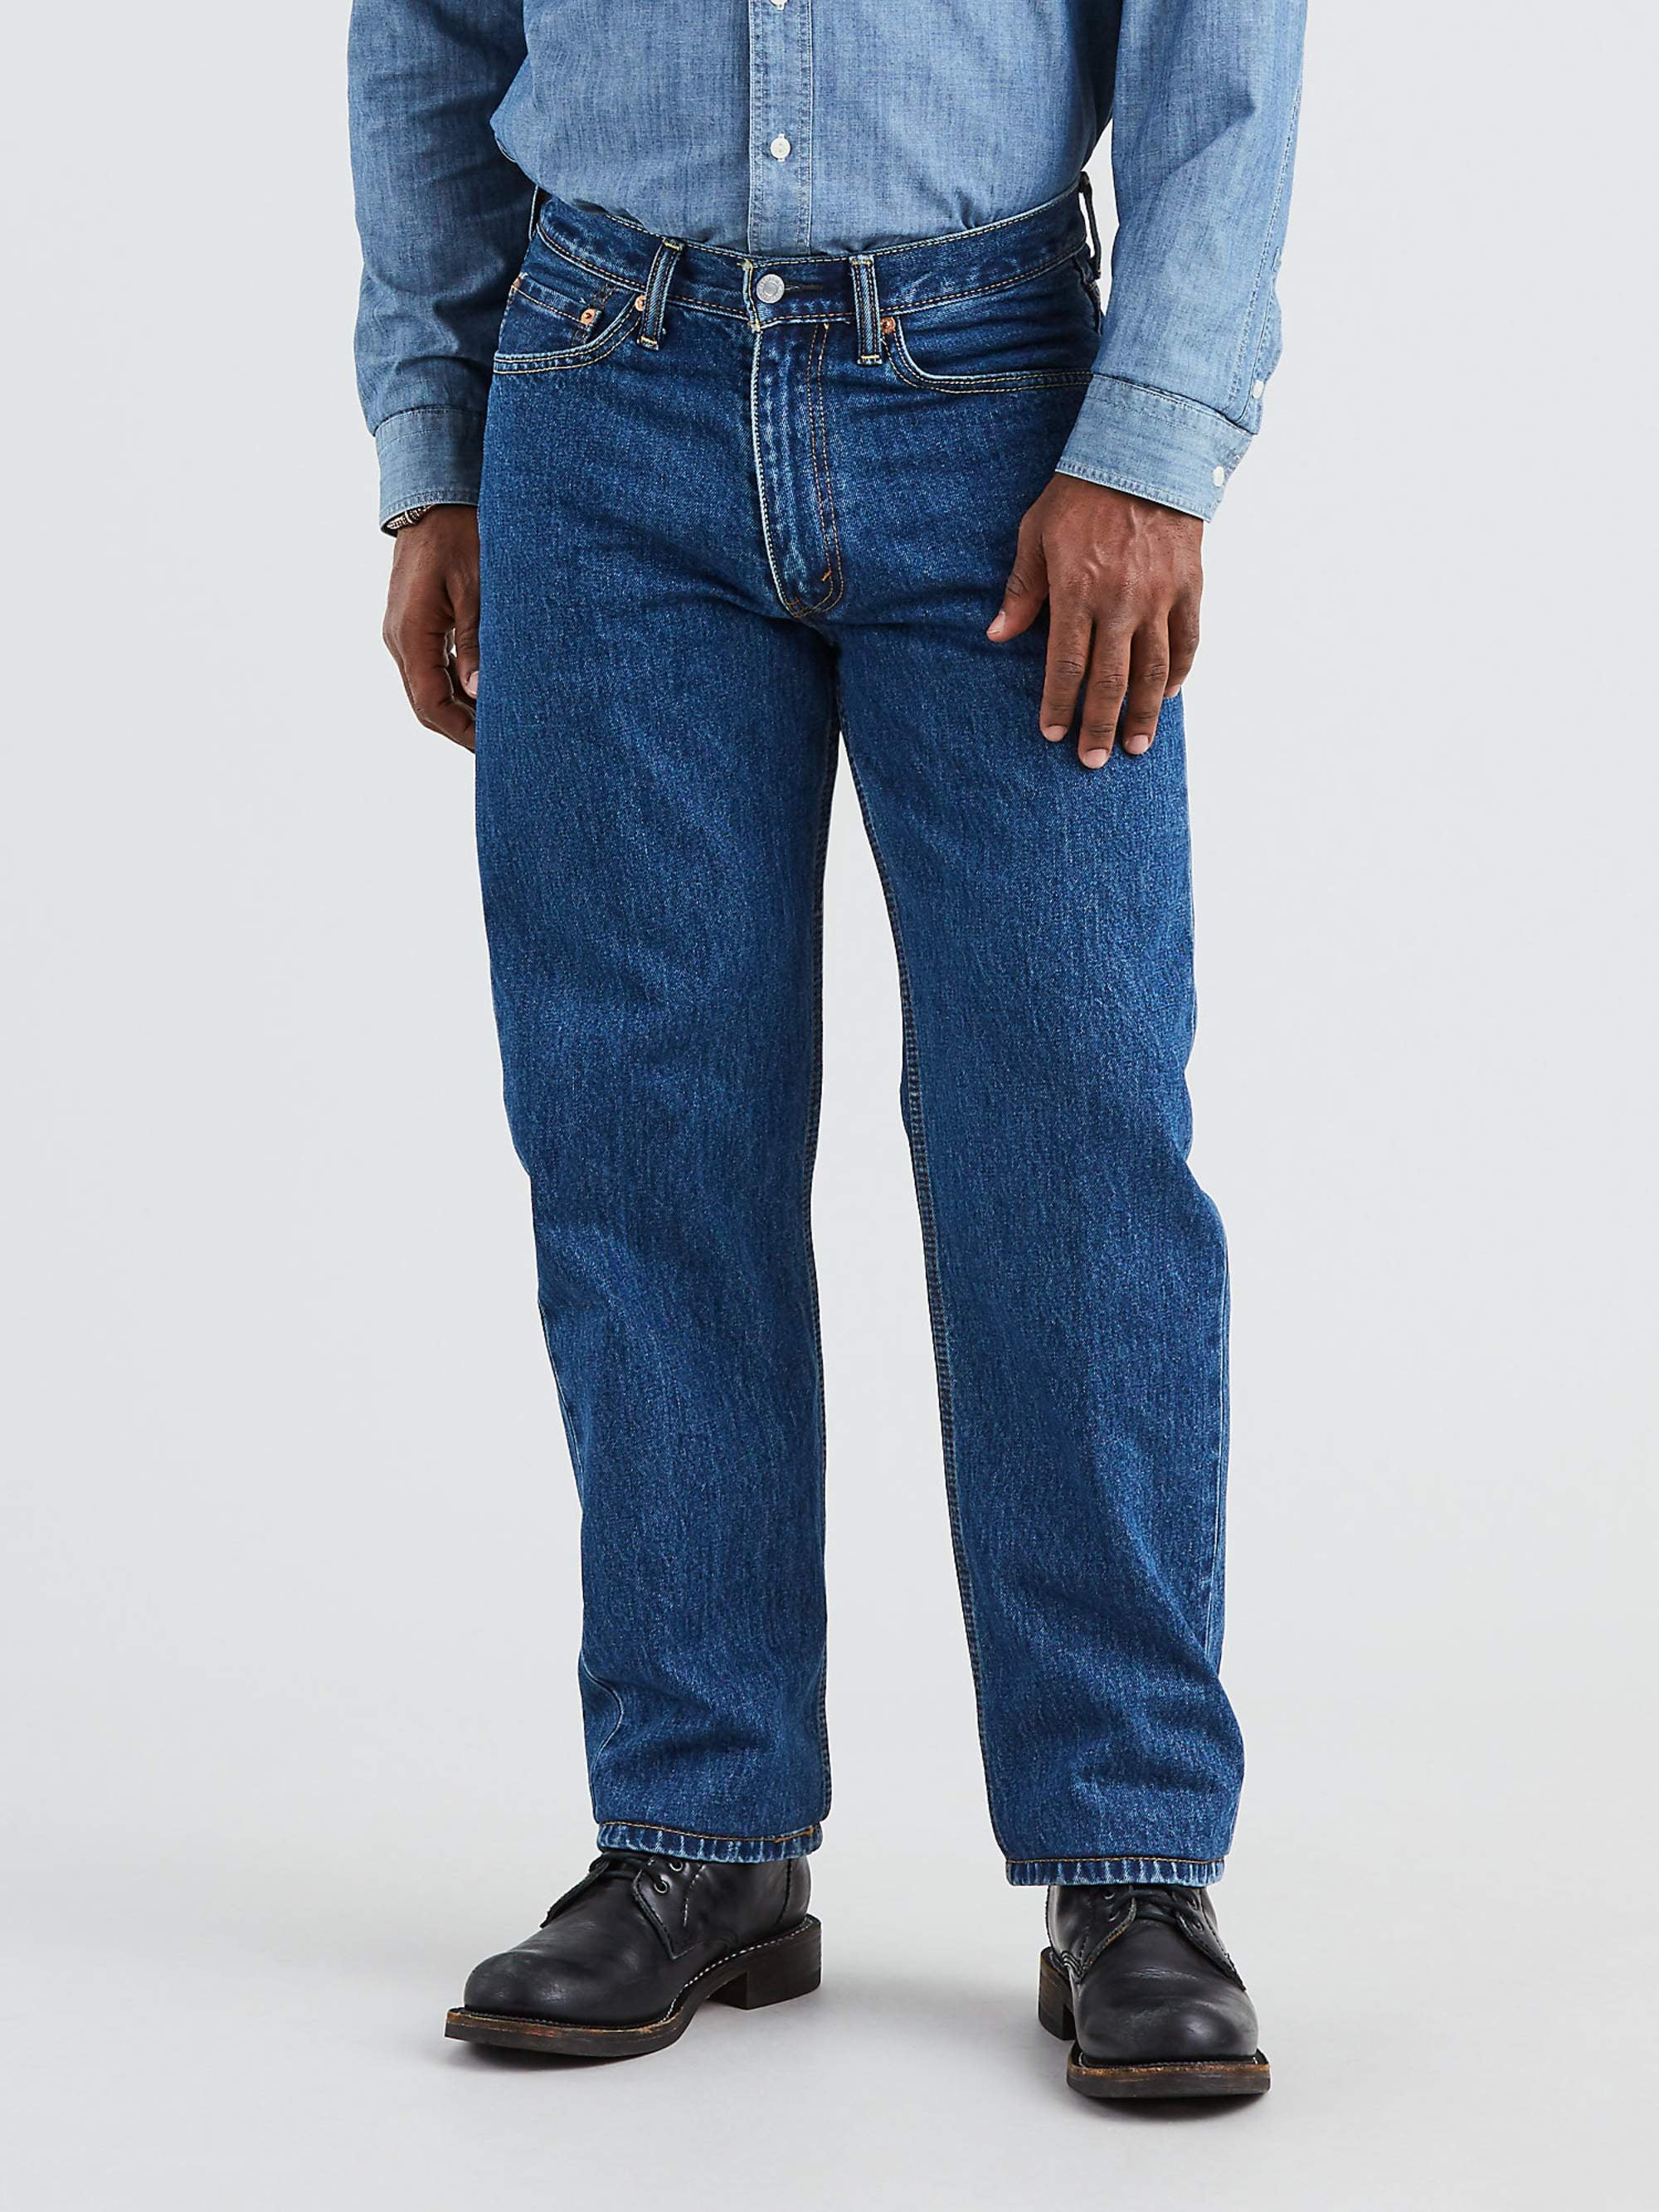 Levi/'s Mens 550 Relaxed Fit Jean